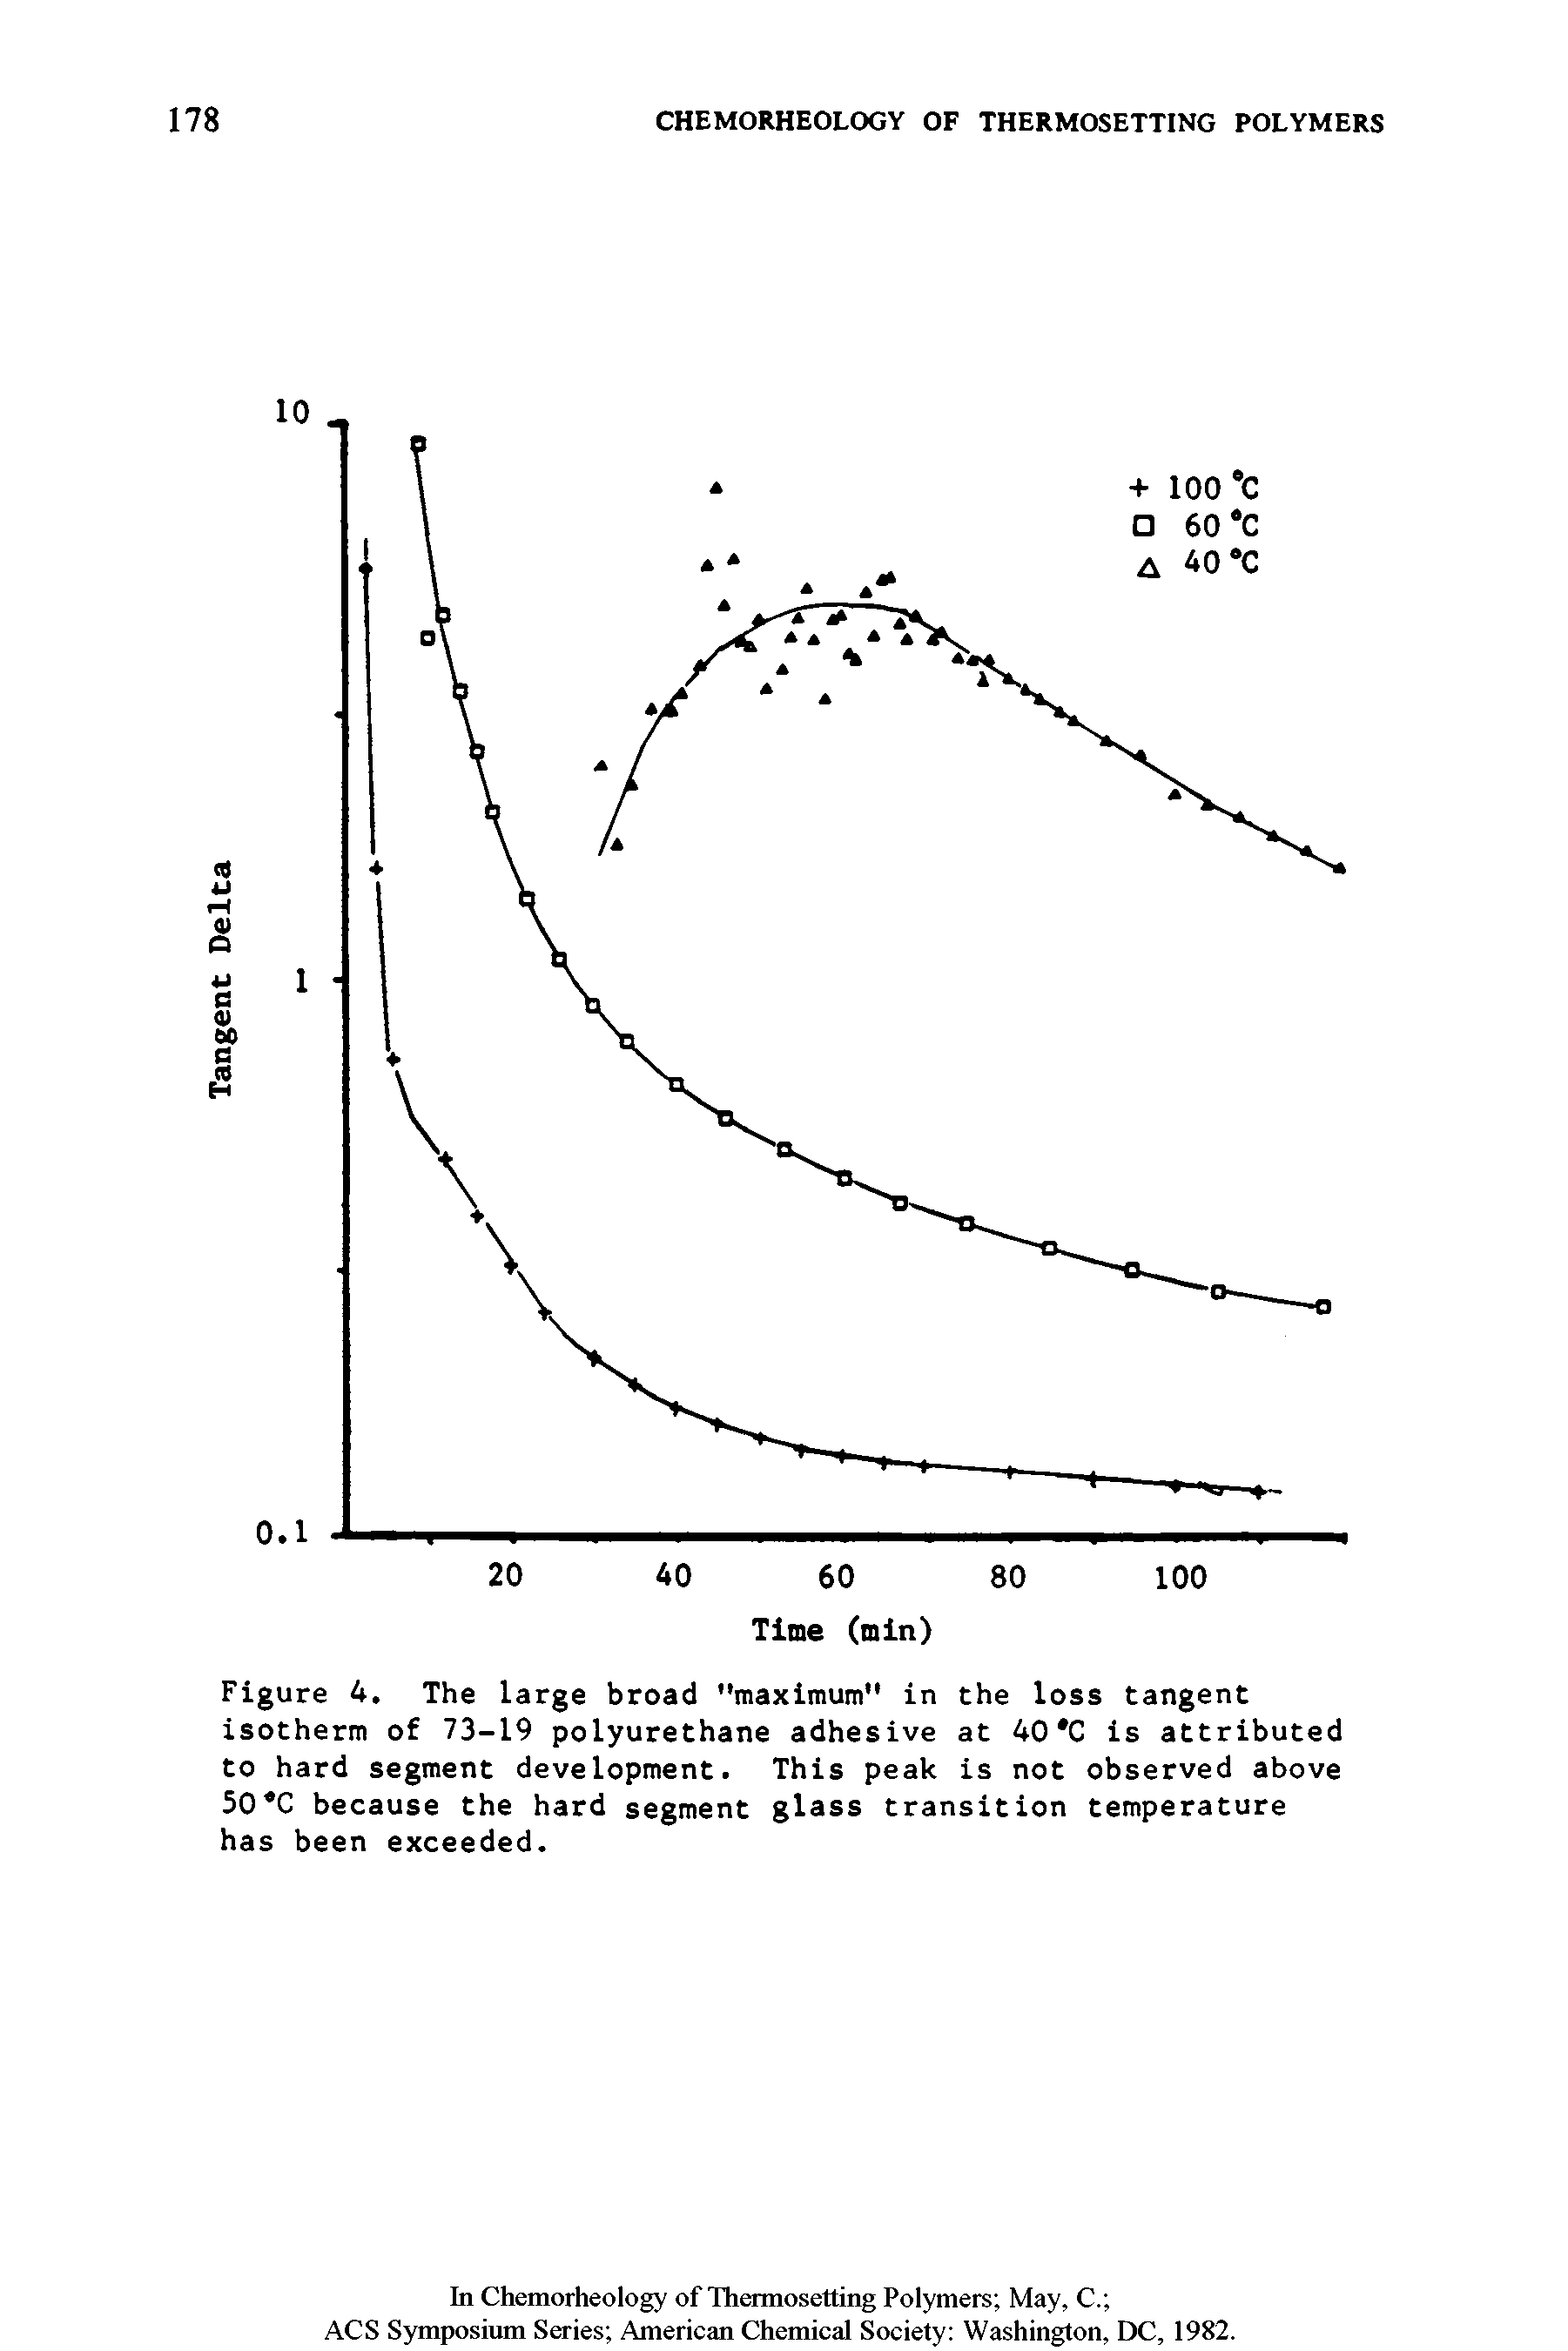 Figure 4. The large broad "maximum" in the loss tangent isotherm of 73-19 polyurethane adhesive at 40 C is attributed to hard segment development. This peak is not observed above 50 C because the hard segment glass transition temperature has been exceeded.